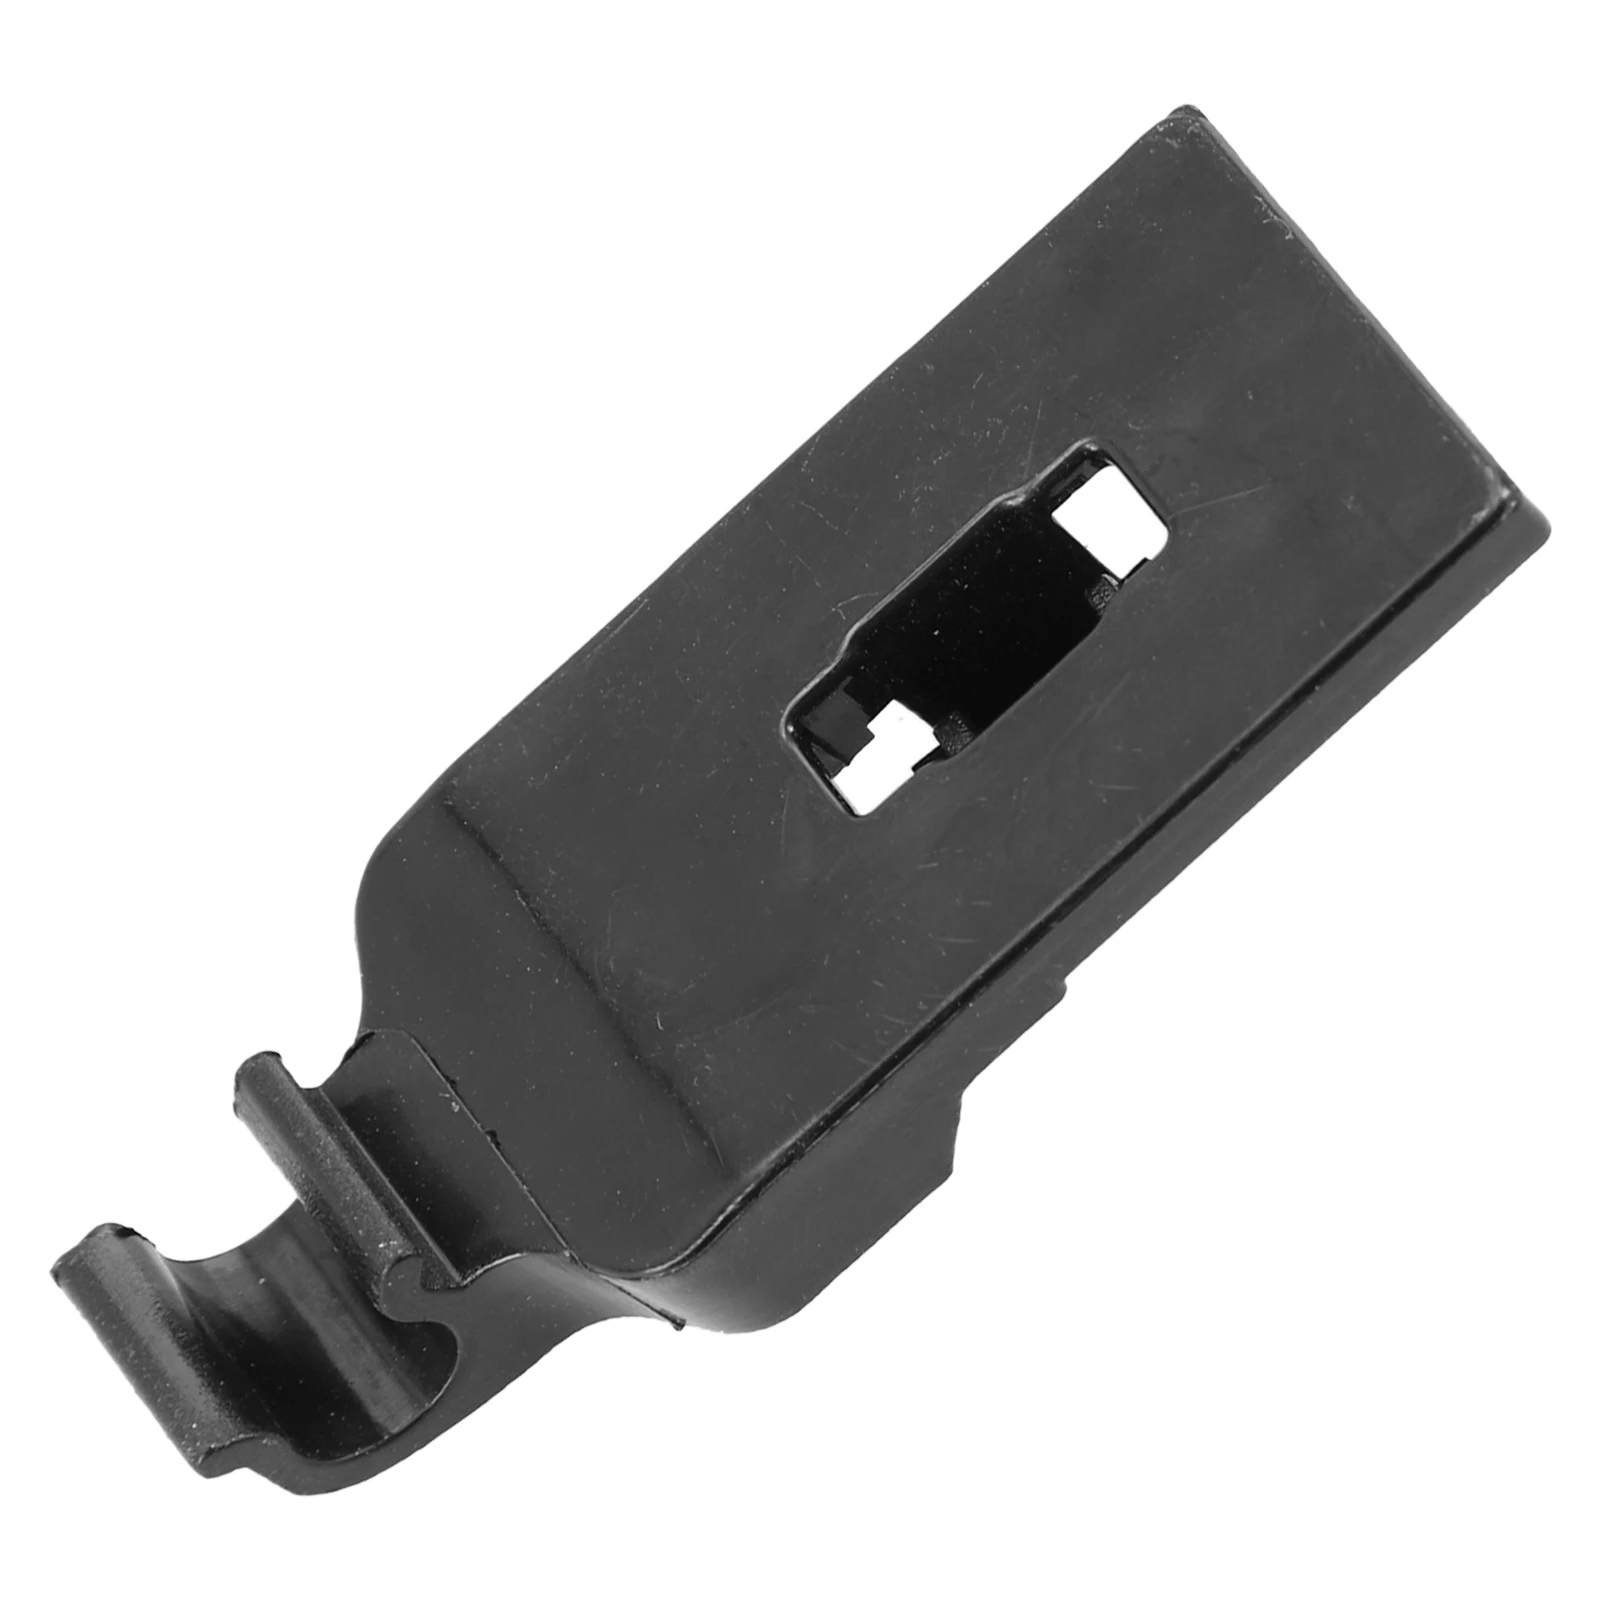 Car Exterior Engine Hood Plastic Prop Rod Clamp Clip For Toyota For Coro... - $8.48